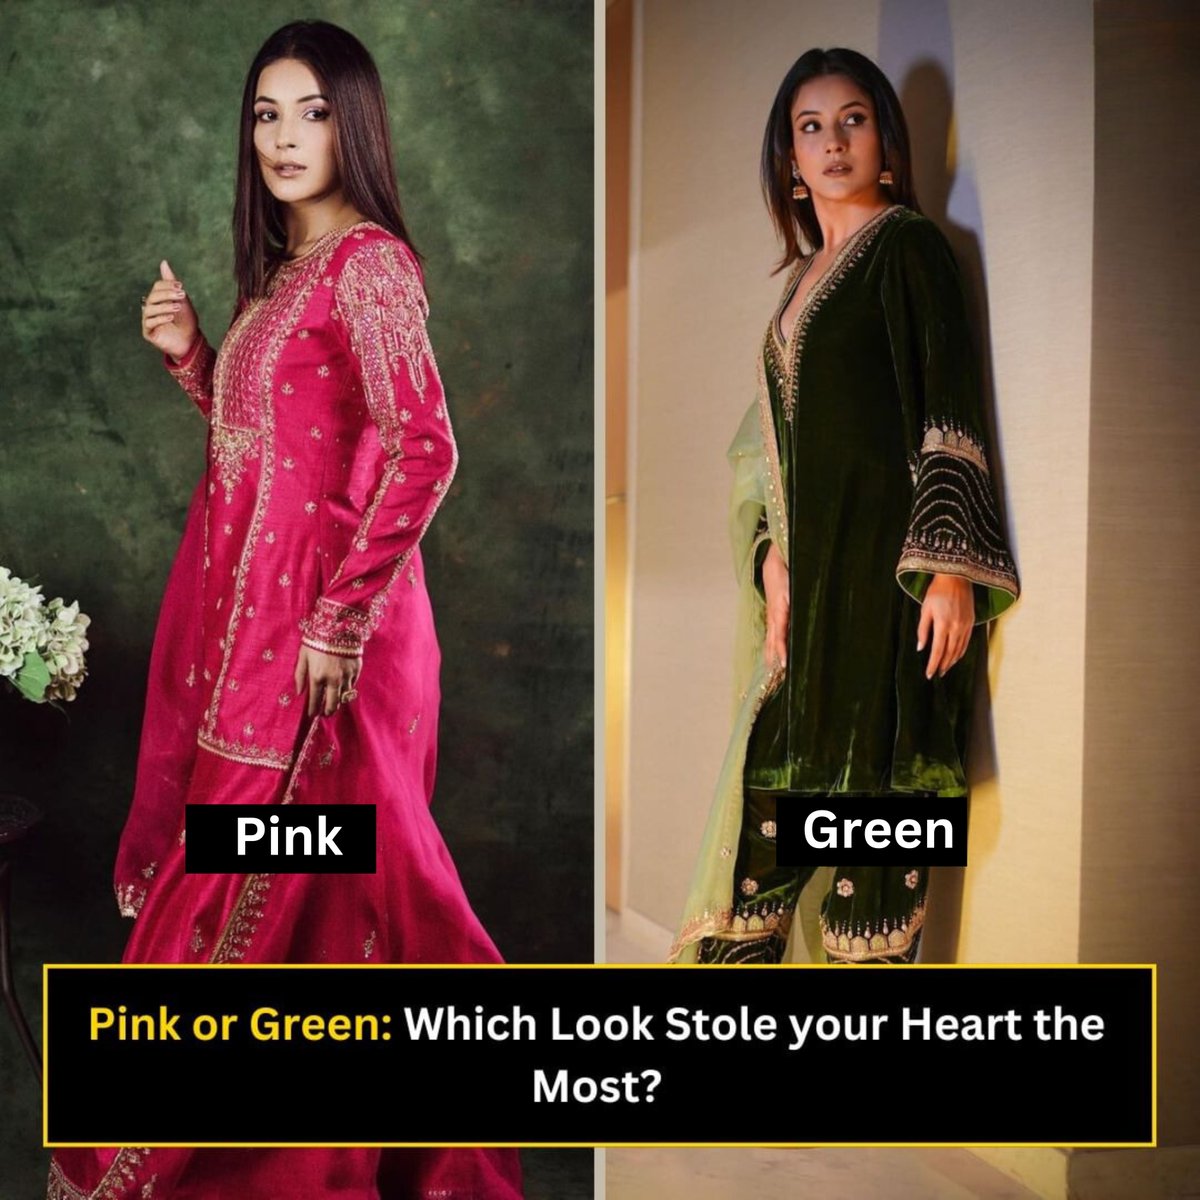 Pink or Green: Which Look Stole Your Heart the Most?
.
.
#shehnaazgill #shehnaazgillfans #shehnaazgillfc #shehnaazgillstyle #ethniclook #traditionalwear